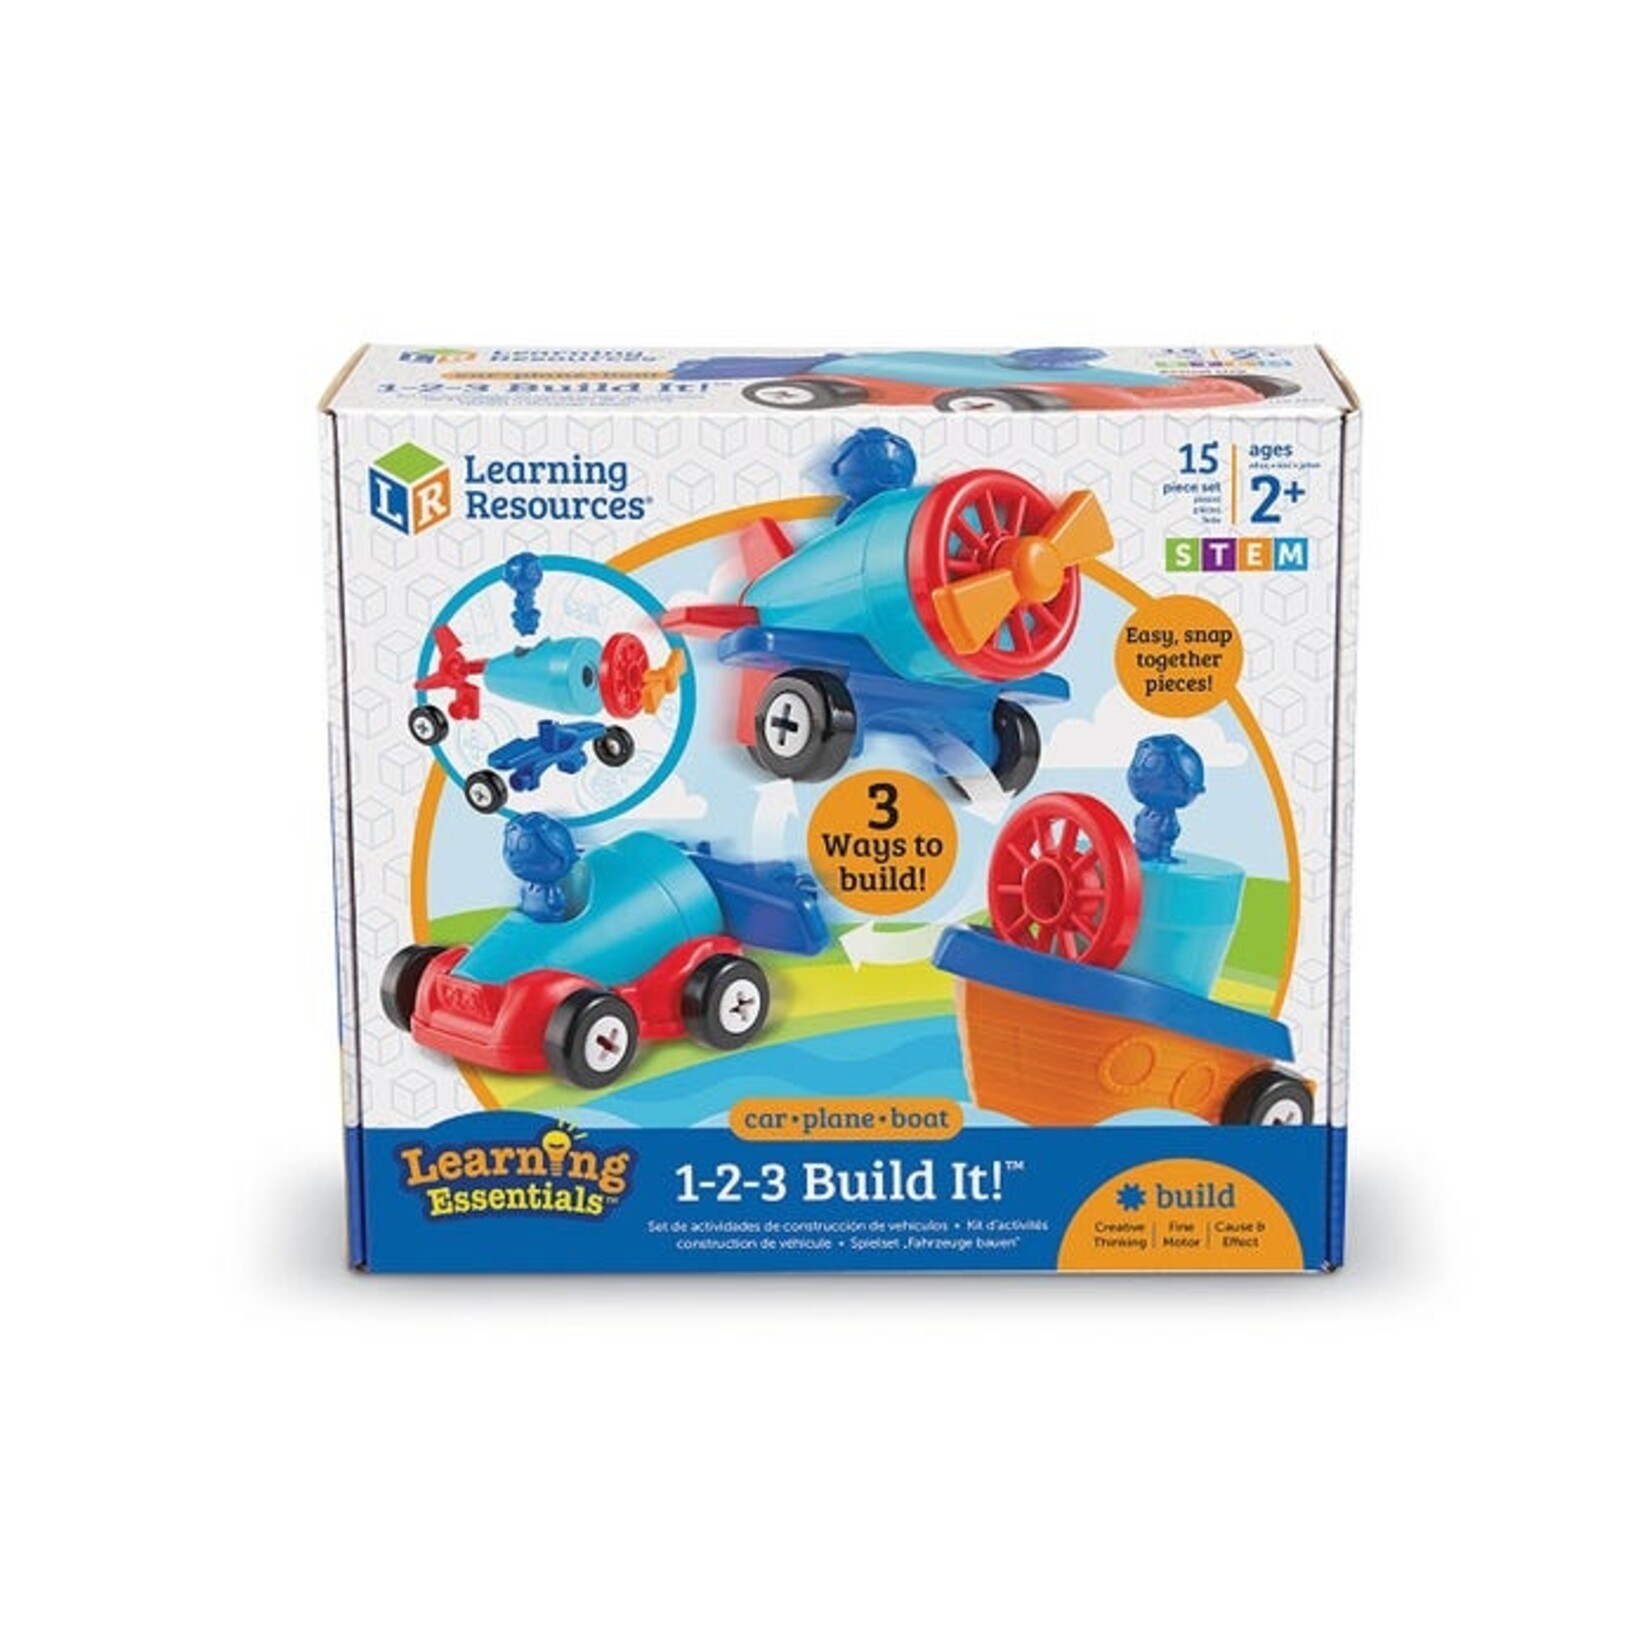 LEARNING RESOURCES INC 1-2-3 Build It!™ Car-Plane-Boat